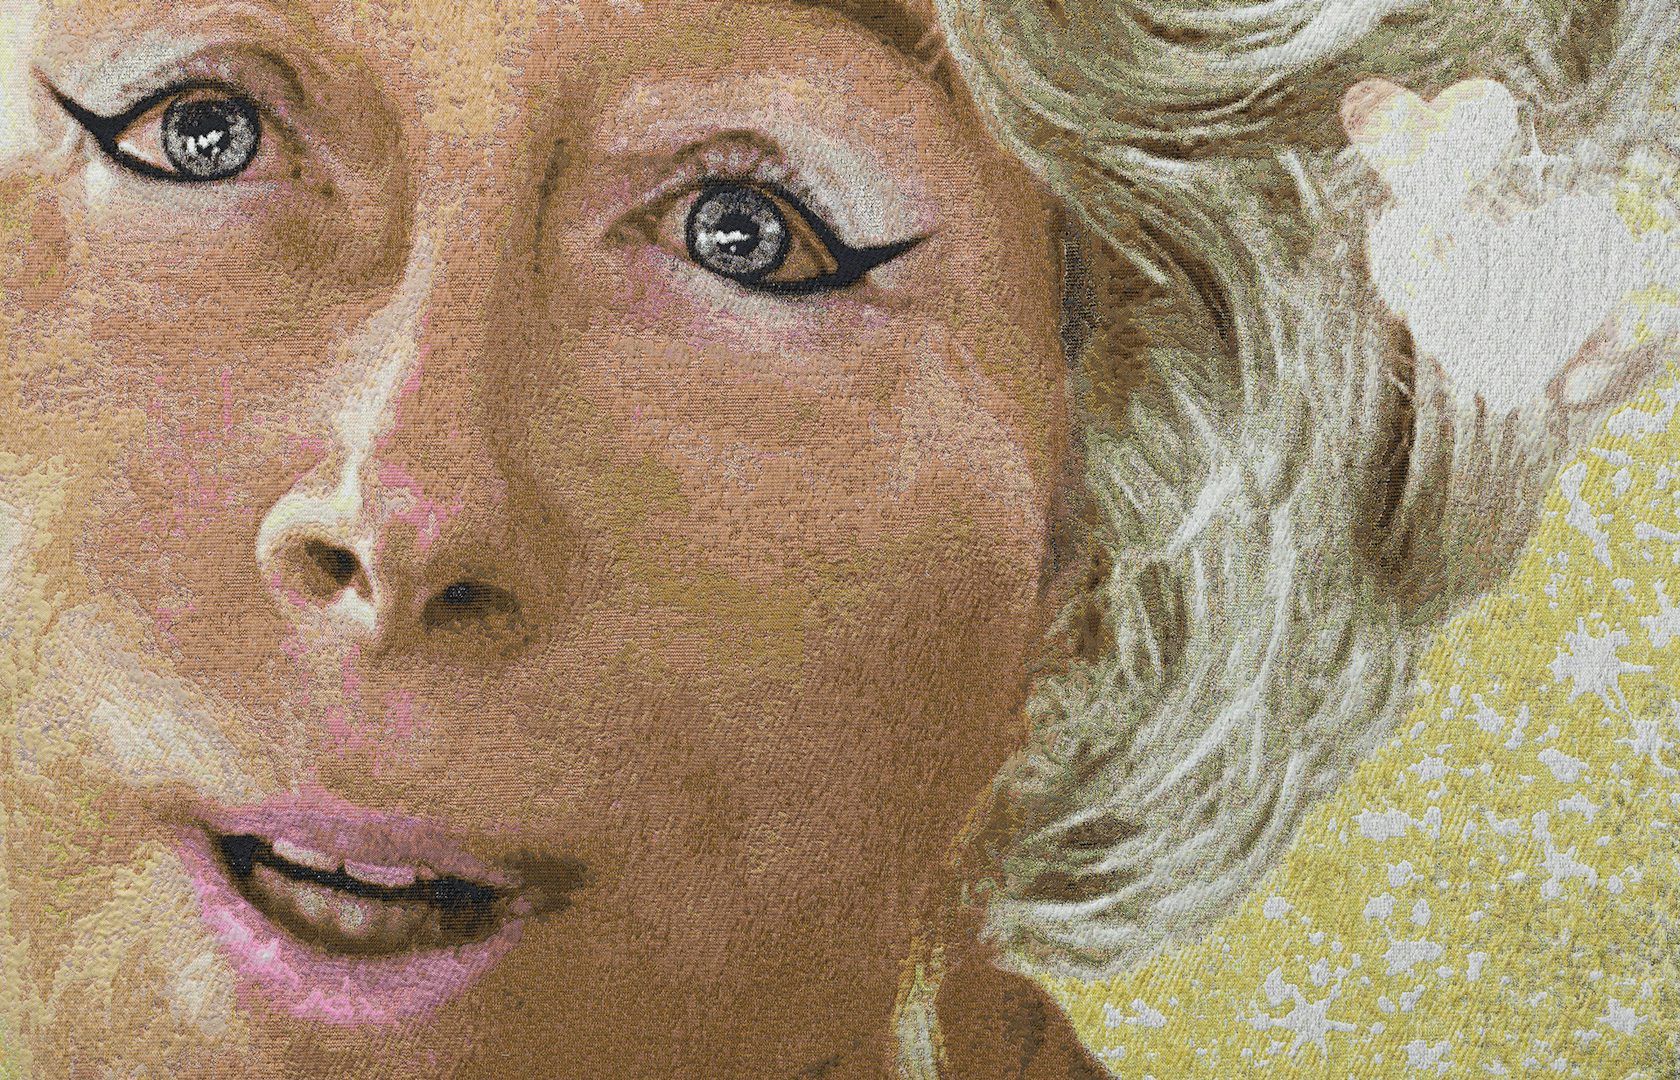 Cindy Sherman and Female Representation in Art